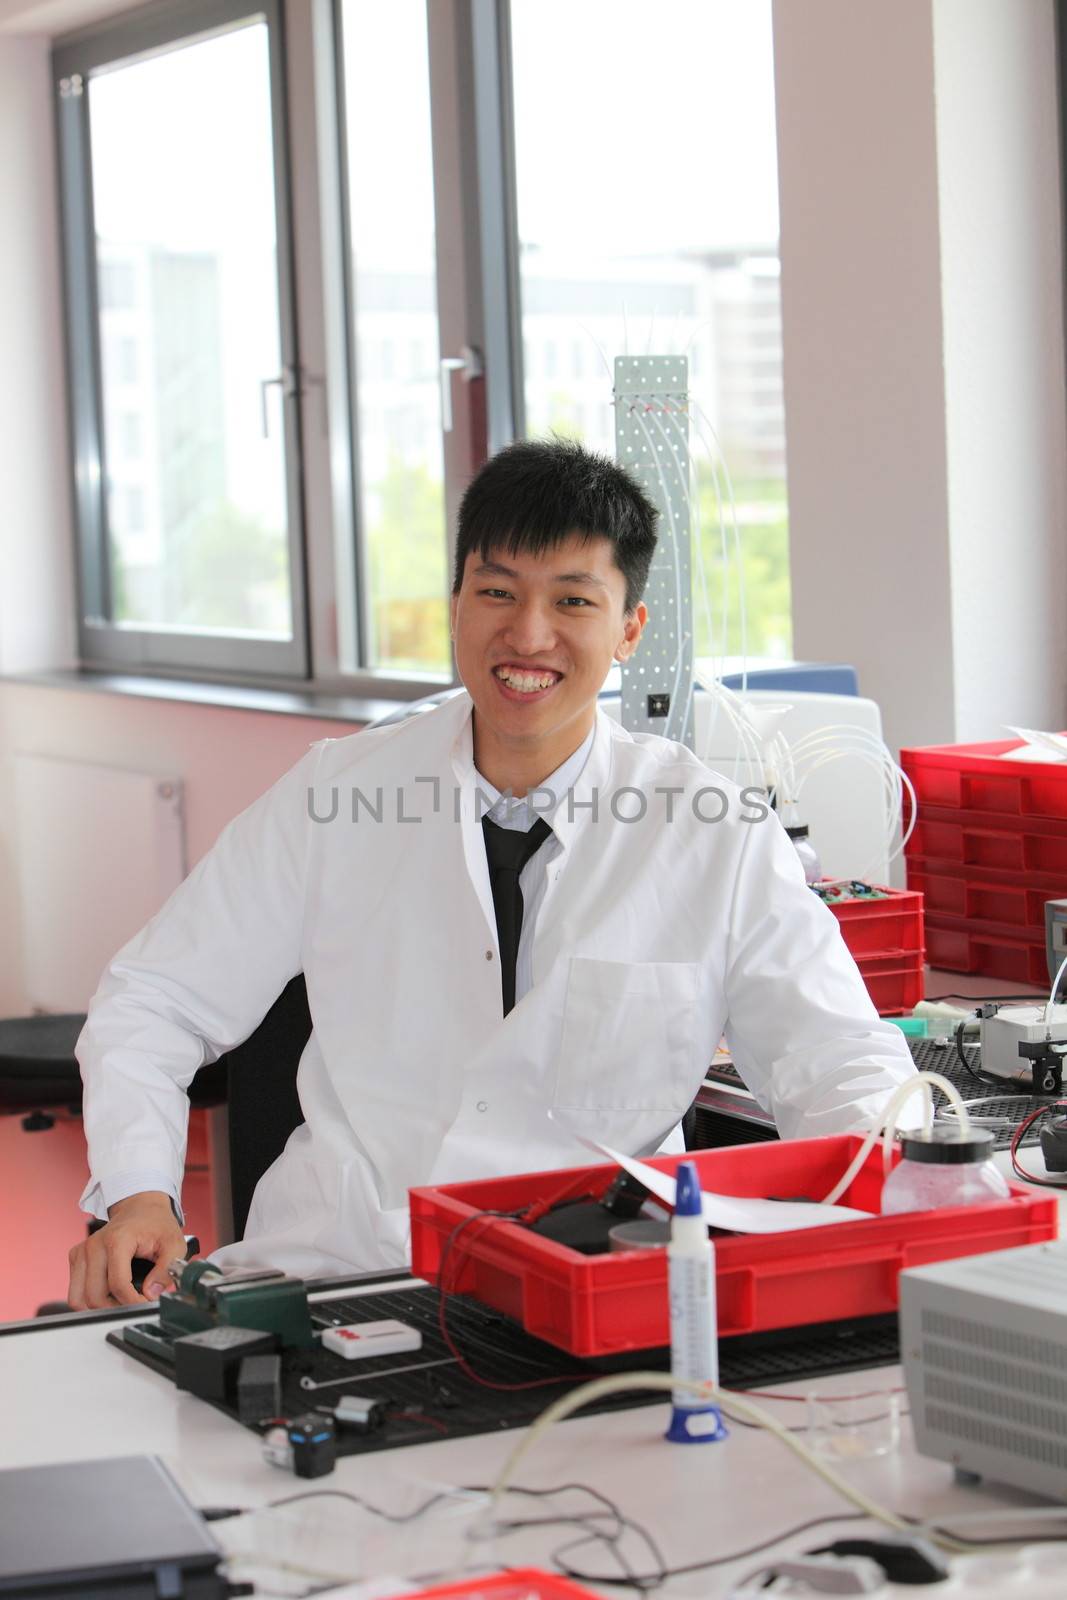 Smiling Asian man working in a laboratory by Farina6000